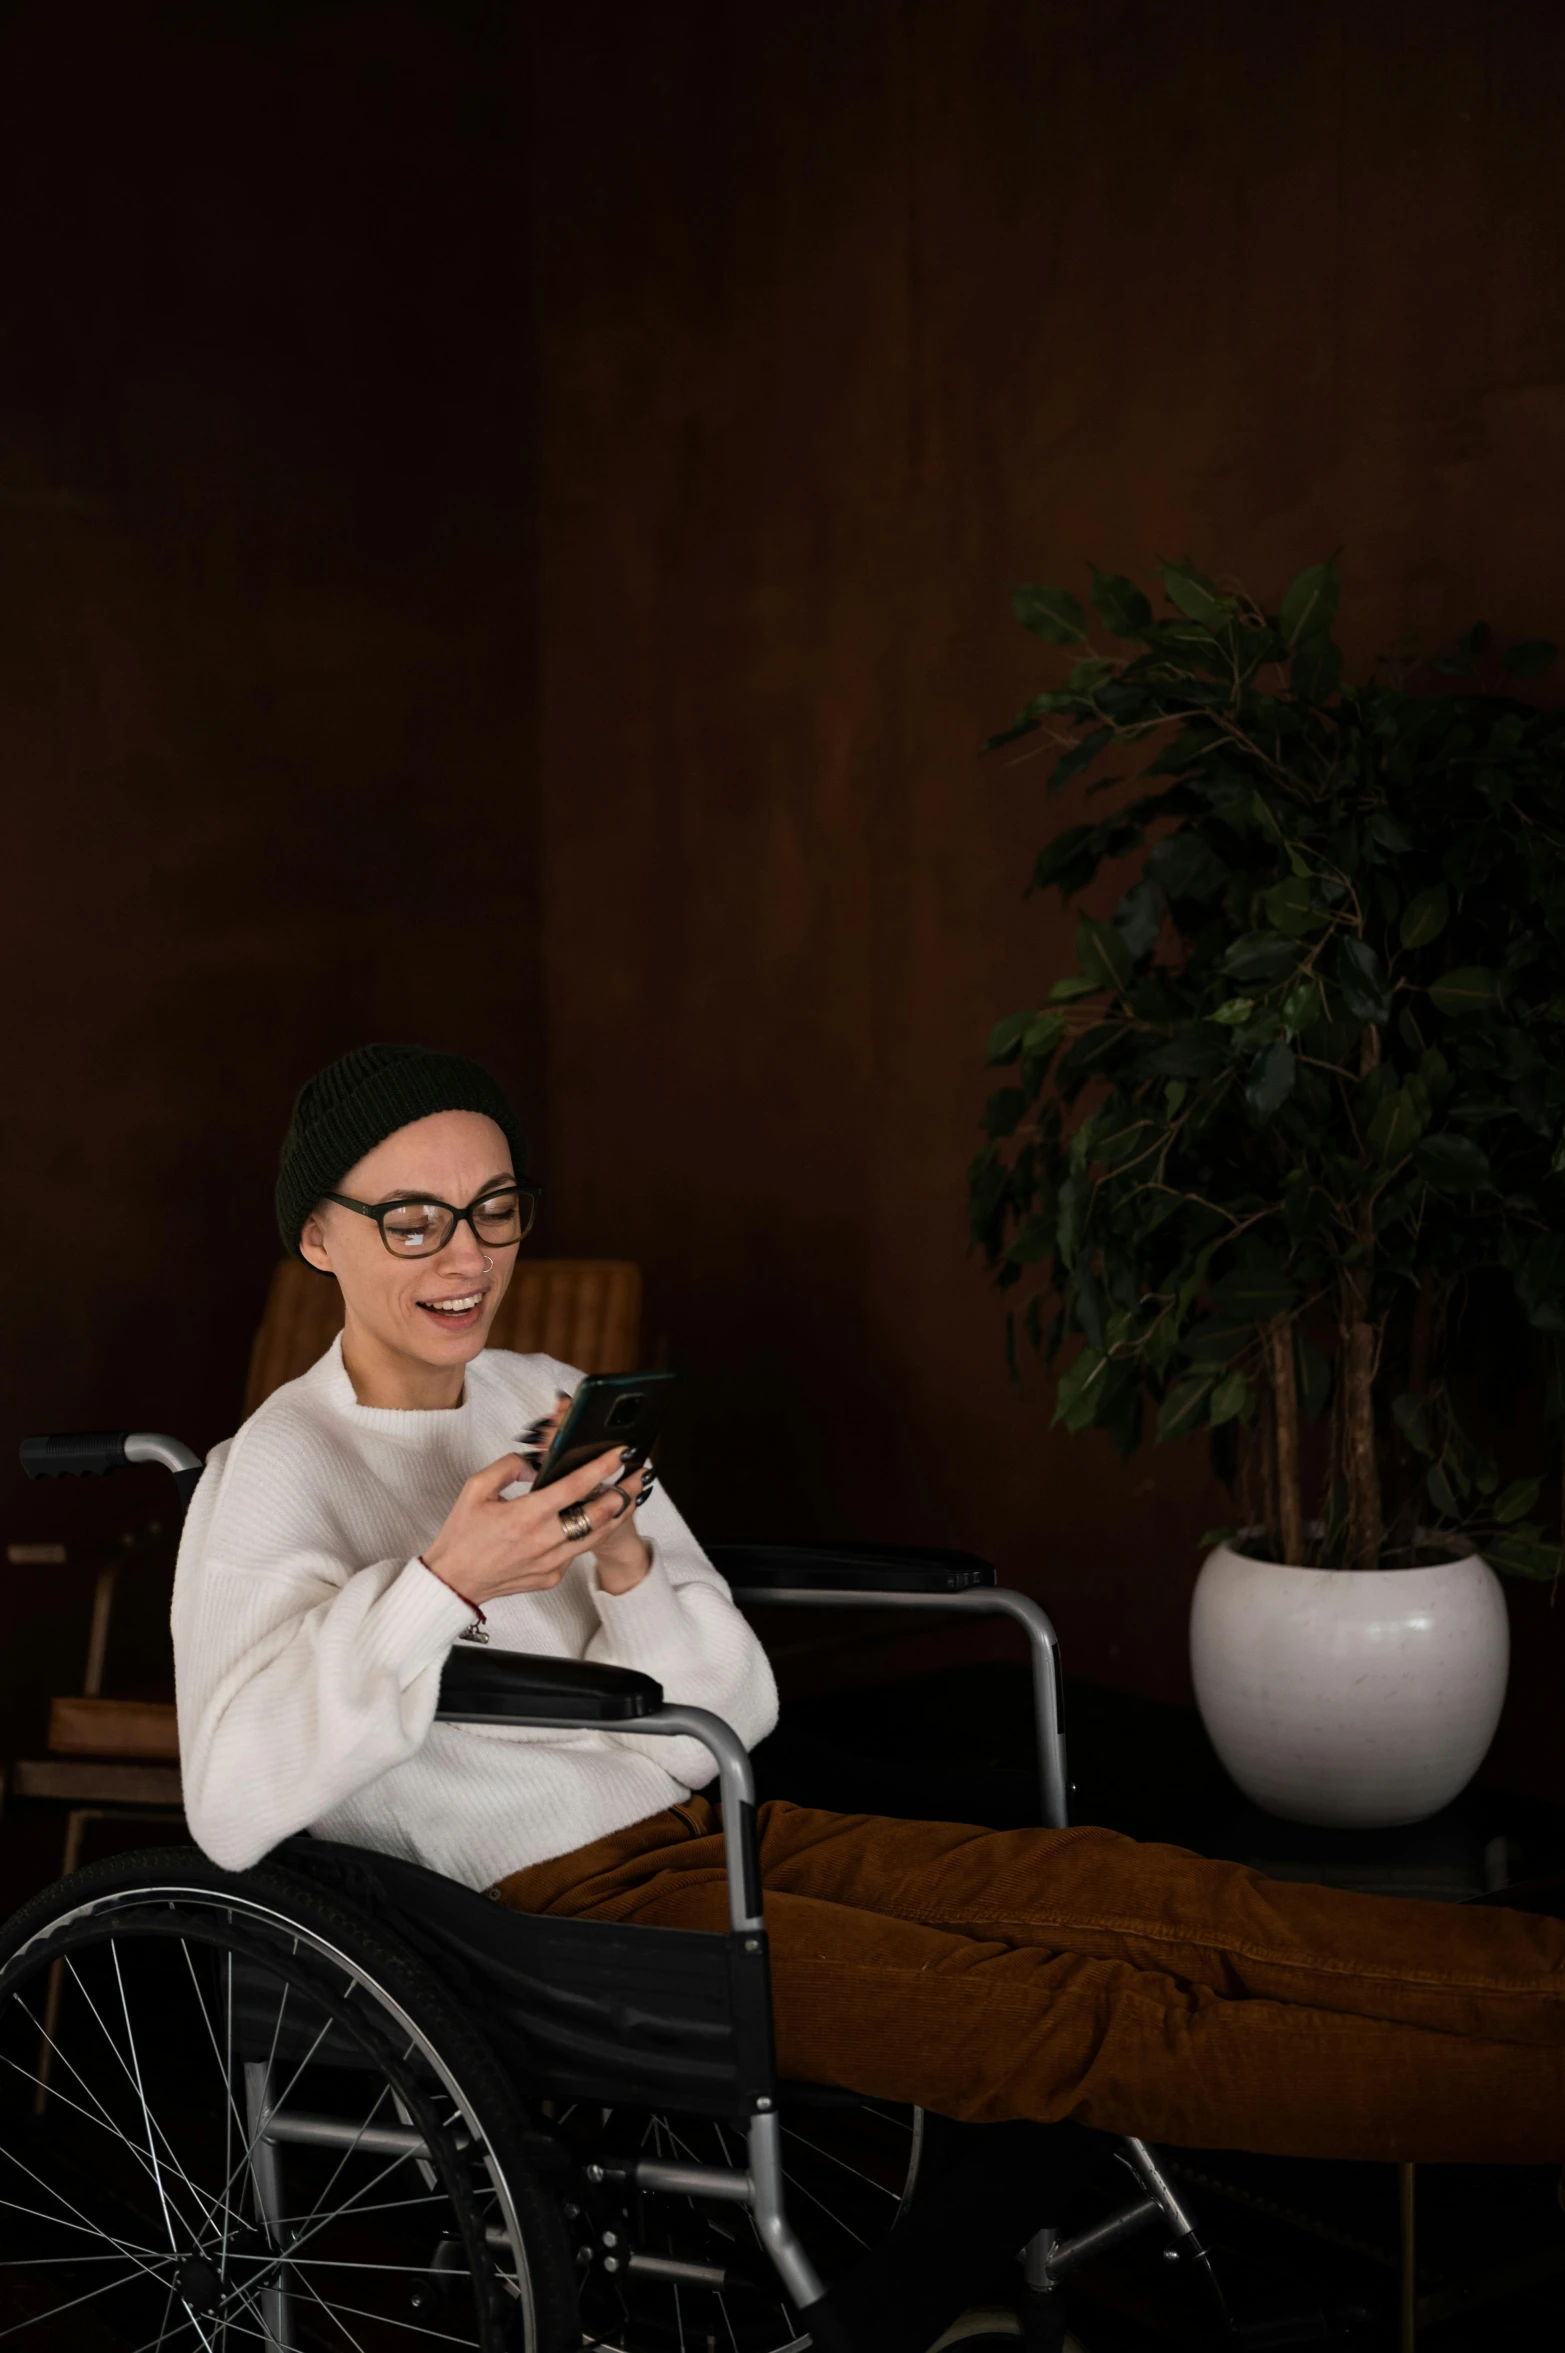 a woman in a wheelchair using a cell phone, a portrait, by Julia Pishtar, trending on pexels, hurufiyya, sitting on a mocha-colored table, 15081959 21121991 01012000 4k, designed for cozy aesthetics!, digital medical equipment